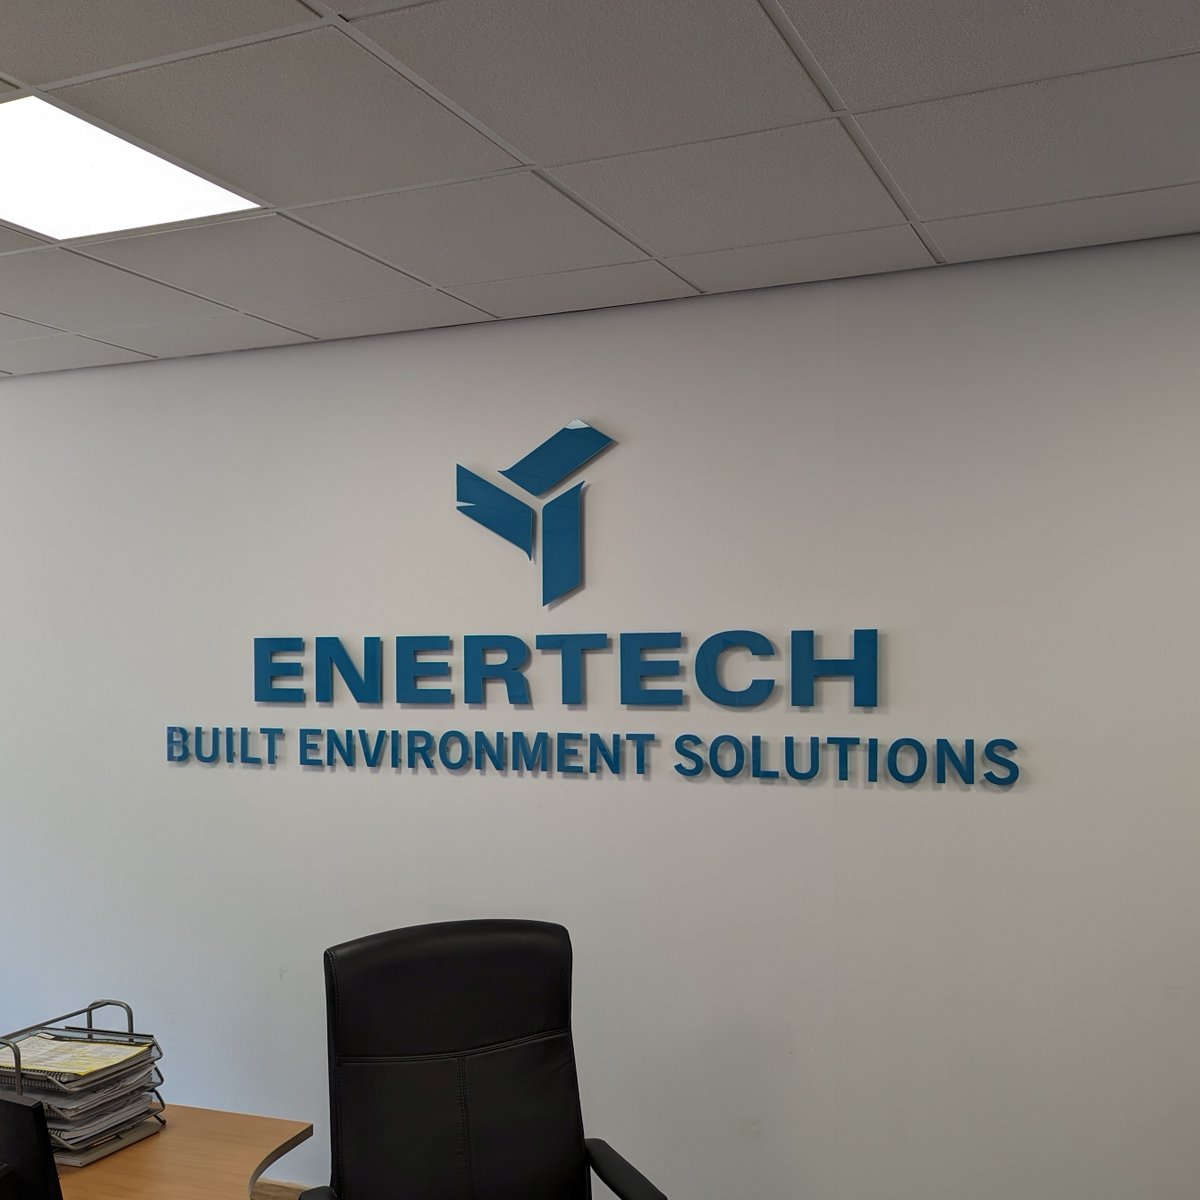 Some custom #signs recently delivered for Enertech Built Environment Solutions new office in Leeds.

#Signage #3DSigns #CNCSigns #TraySigns #AcrylicSigns #MadeInUK #NewOffice #NewSignDay #NewSign #BarnsleyBusiness #LeedsBusiness #BarnsleyIsBrill #YorkshireBusiness #Barnsley